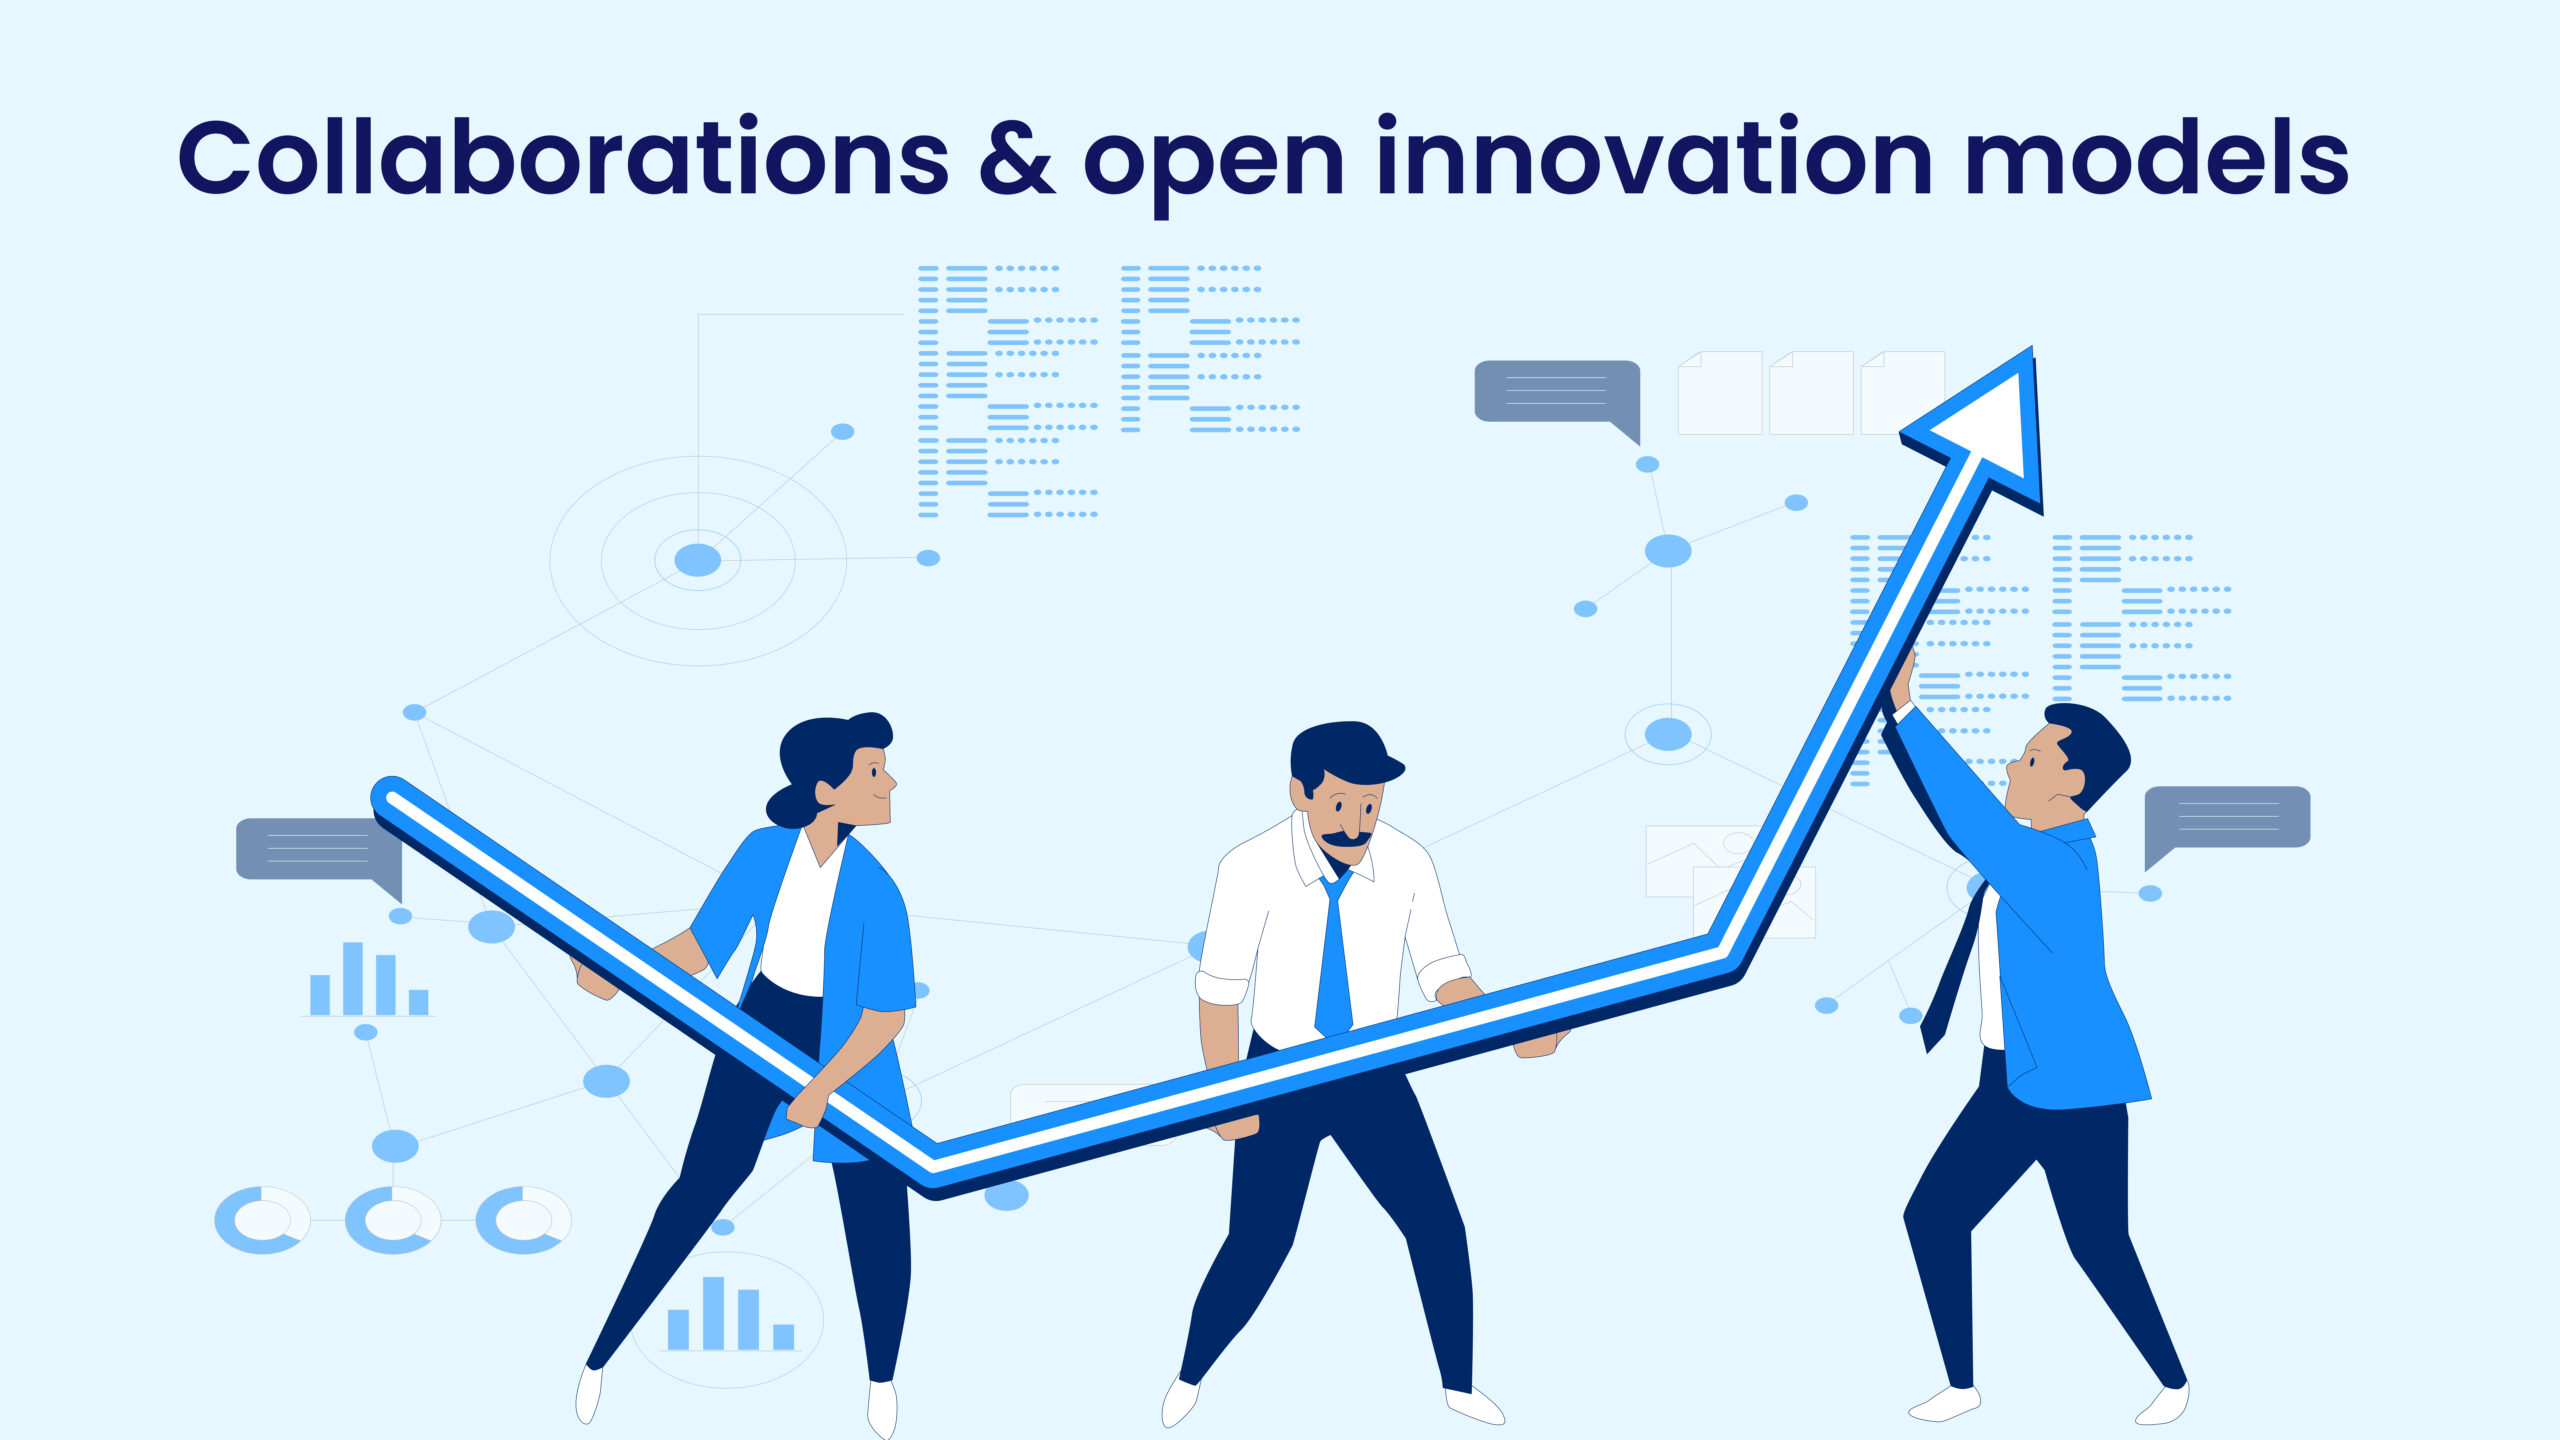 How partnerships and open innovation models are driving innovation in the life sciences sector.